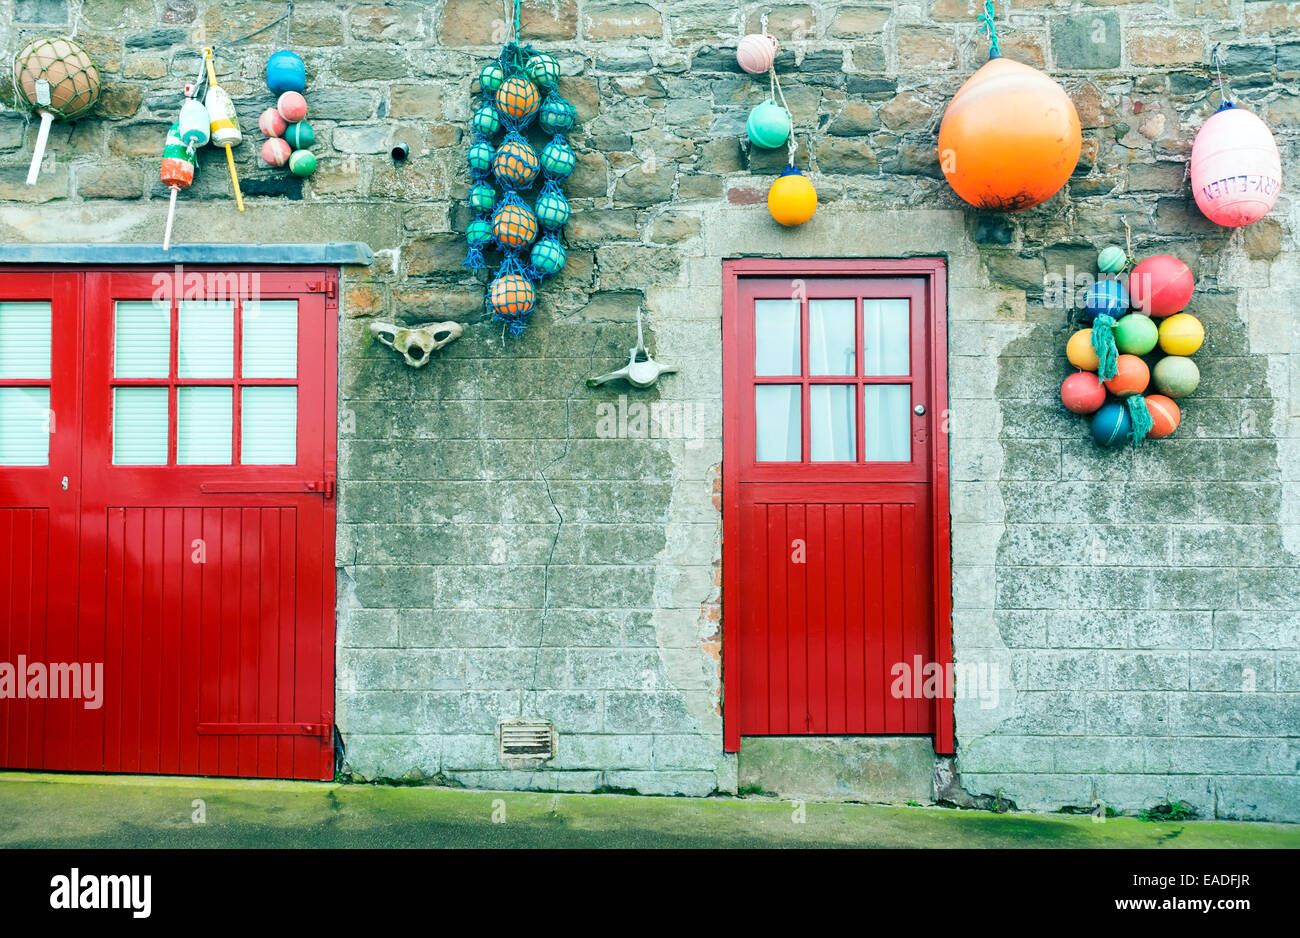 Colourful fishing floats decorate a wall at a harbour / harbor. Stock Photo